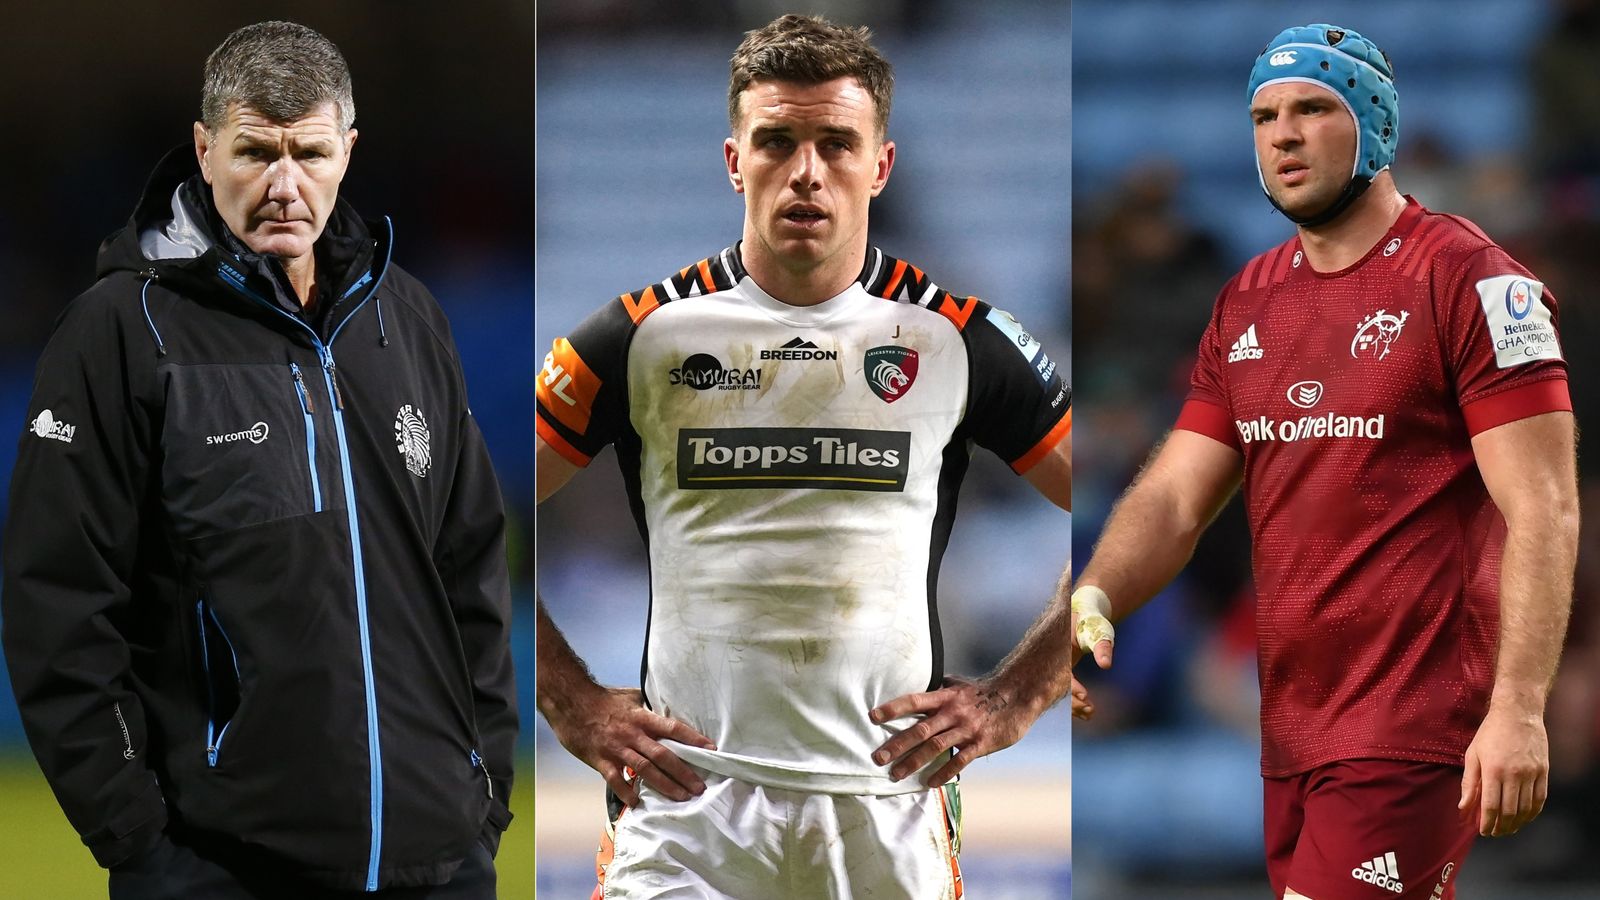 Heineken Champions Cup Round 3: Where do things stand ahead of the weekend’s fixtures?